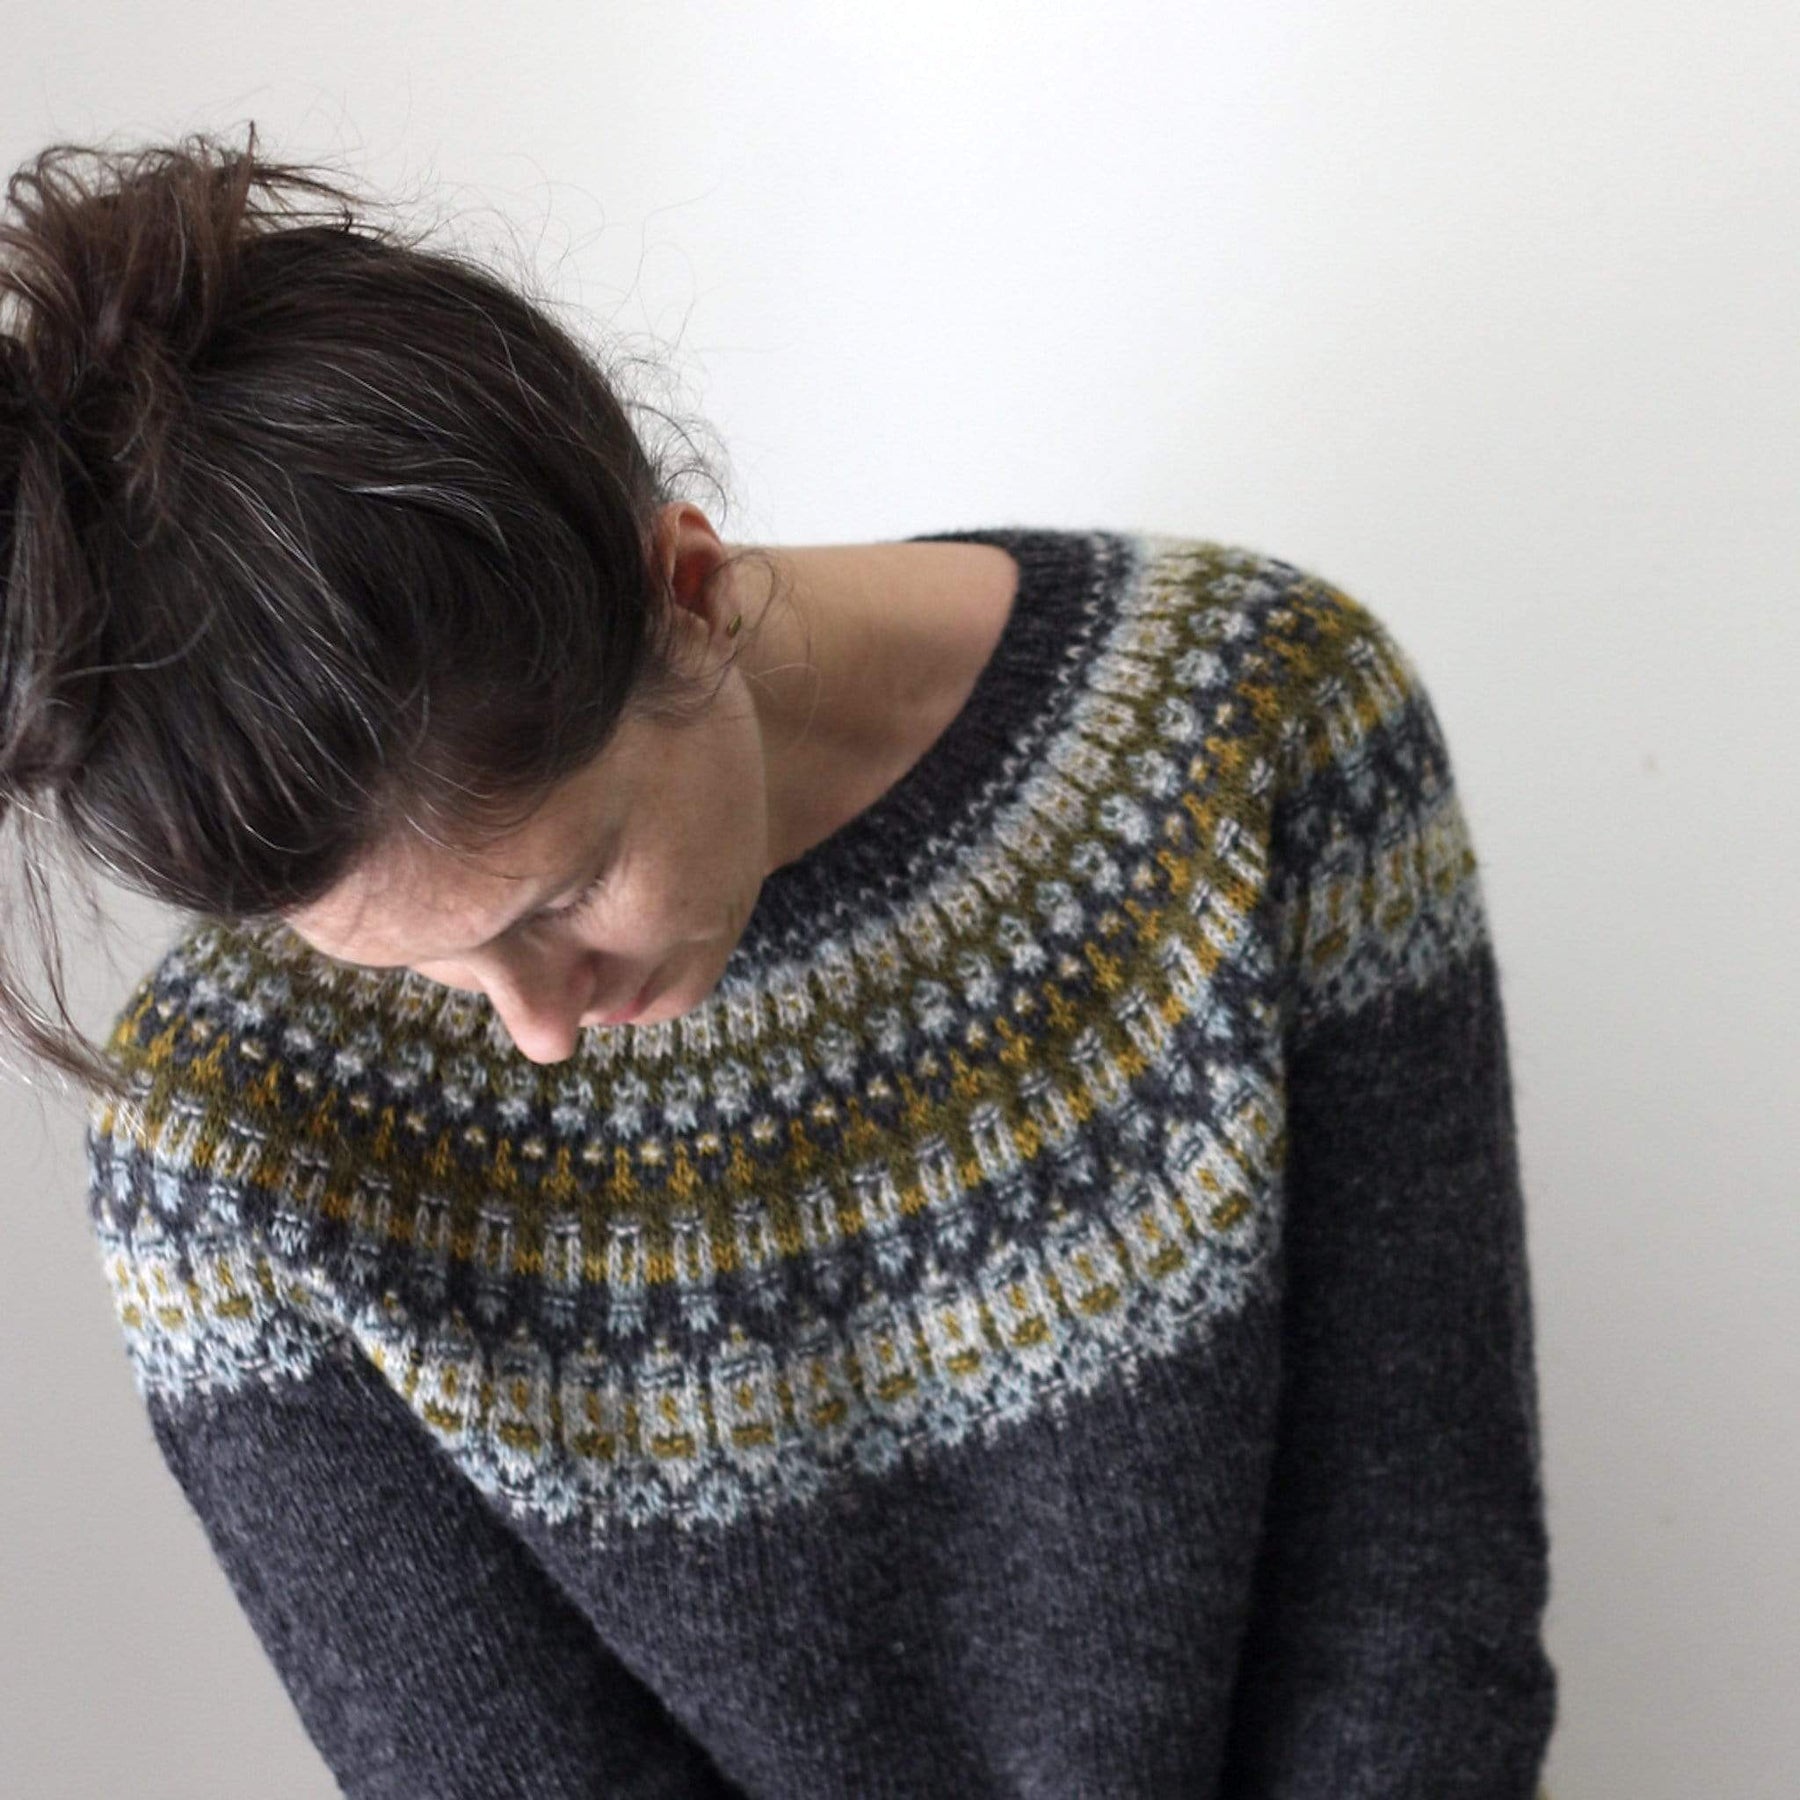 Traditional Nordic Knits - New Edition – The Woolly Thistle